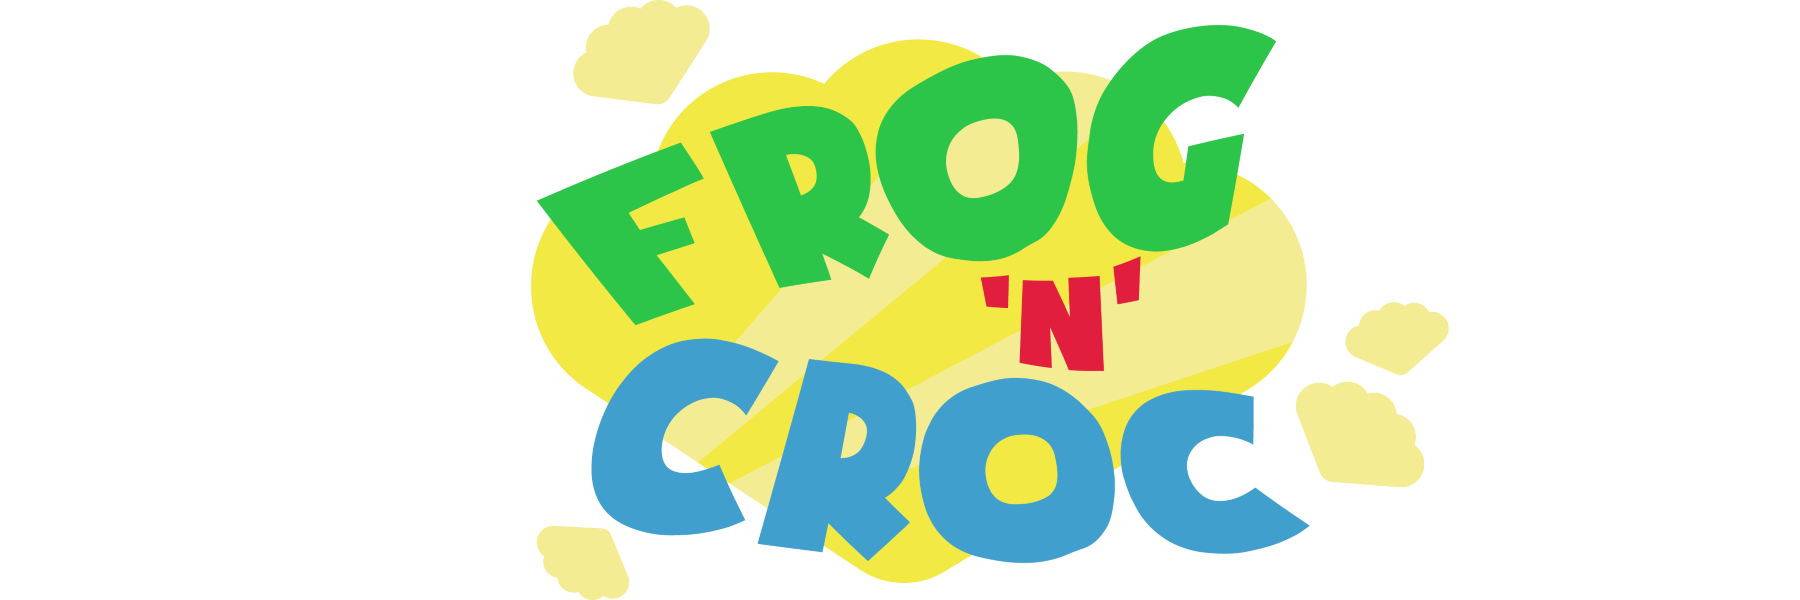 Frog and Croc